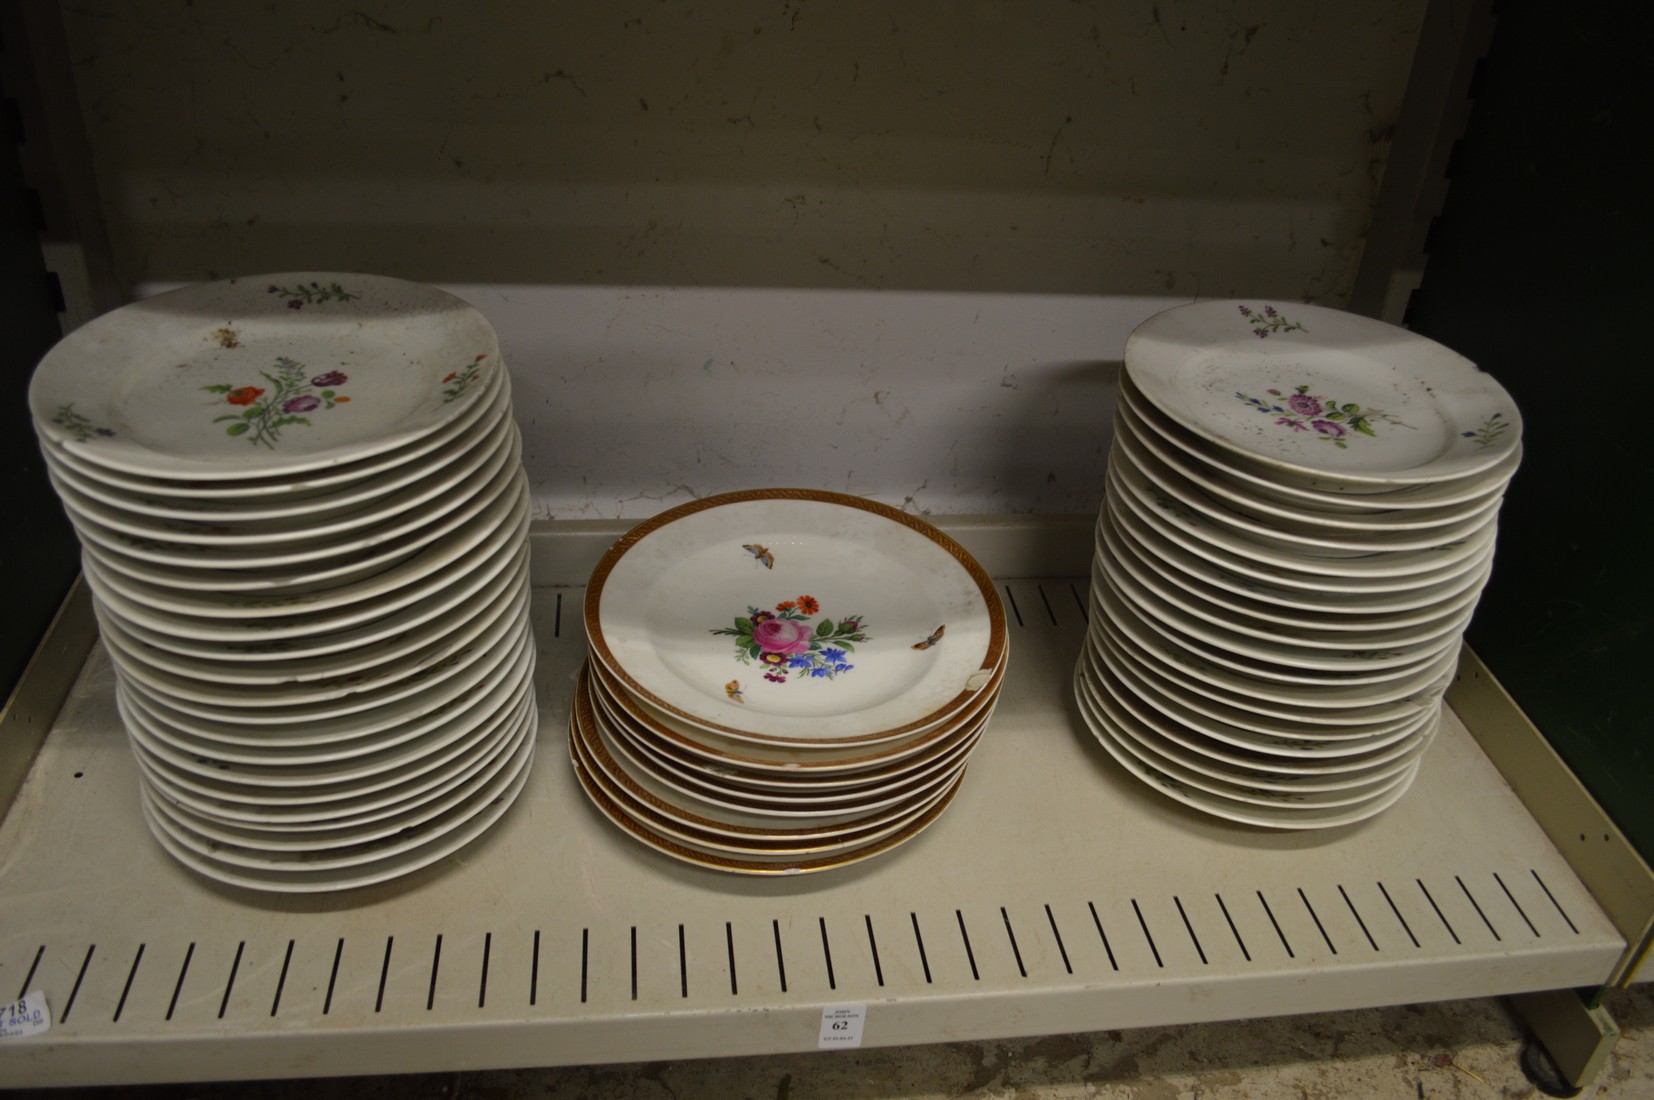 Floral decorated plates and dishes.